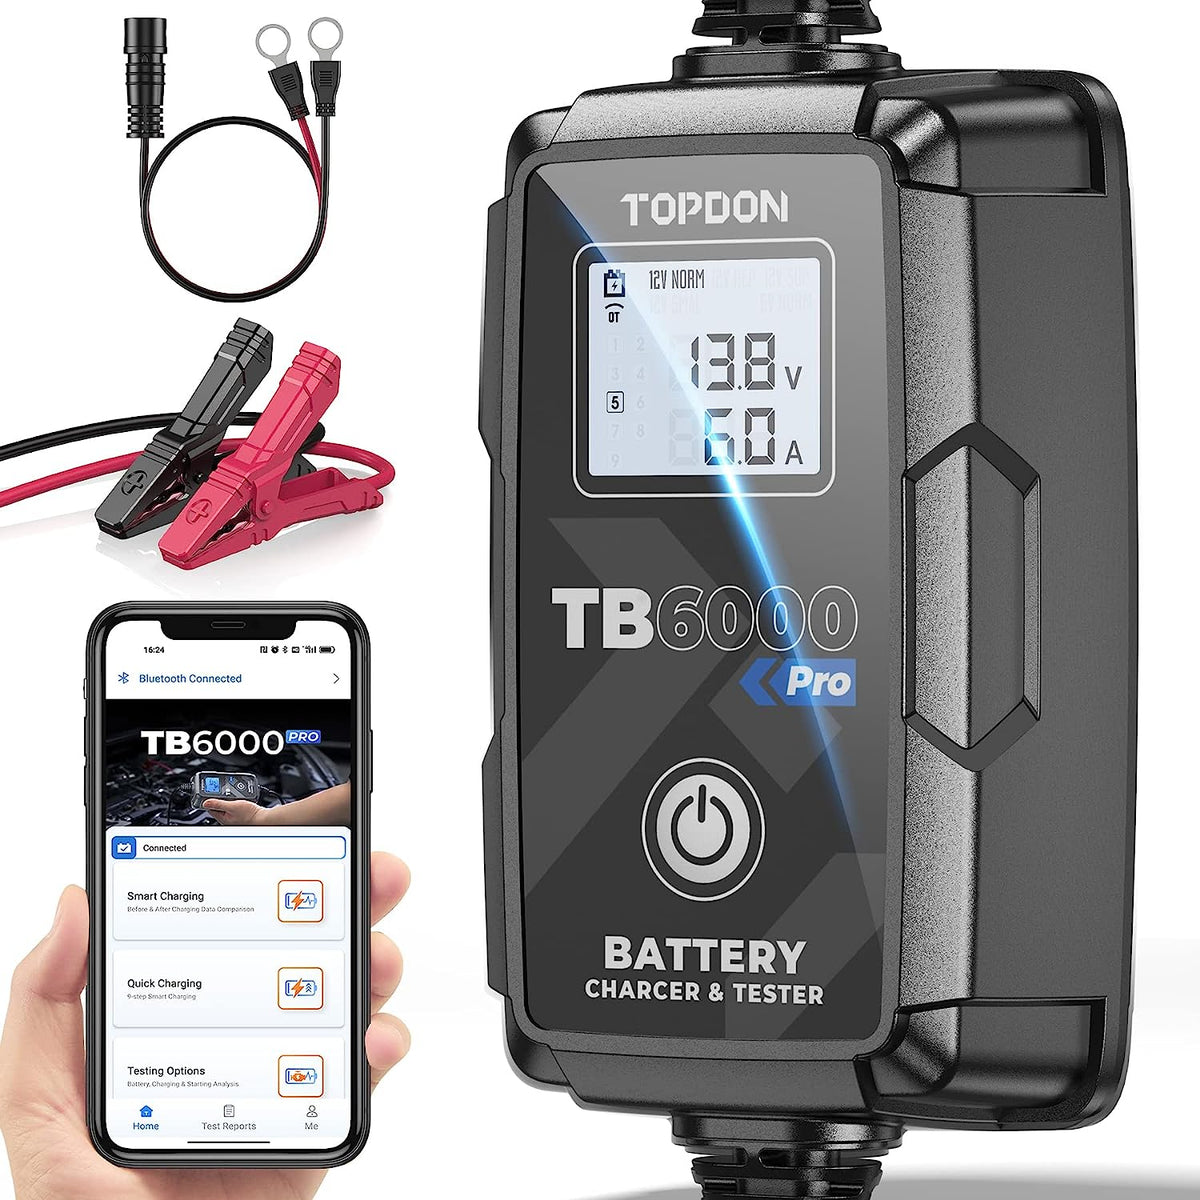 Topdon TB6000 Pro Battery Charger Battery Tester